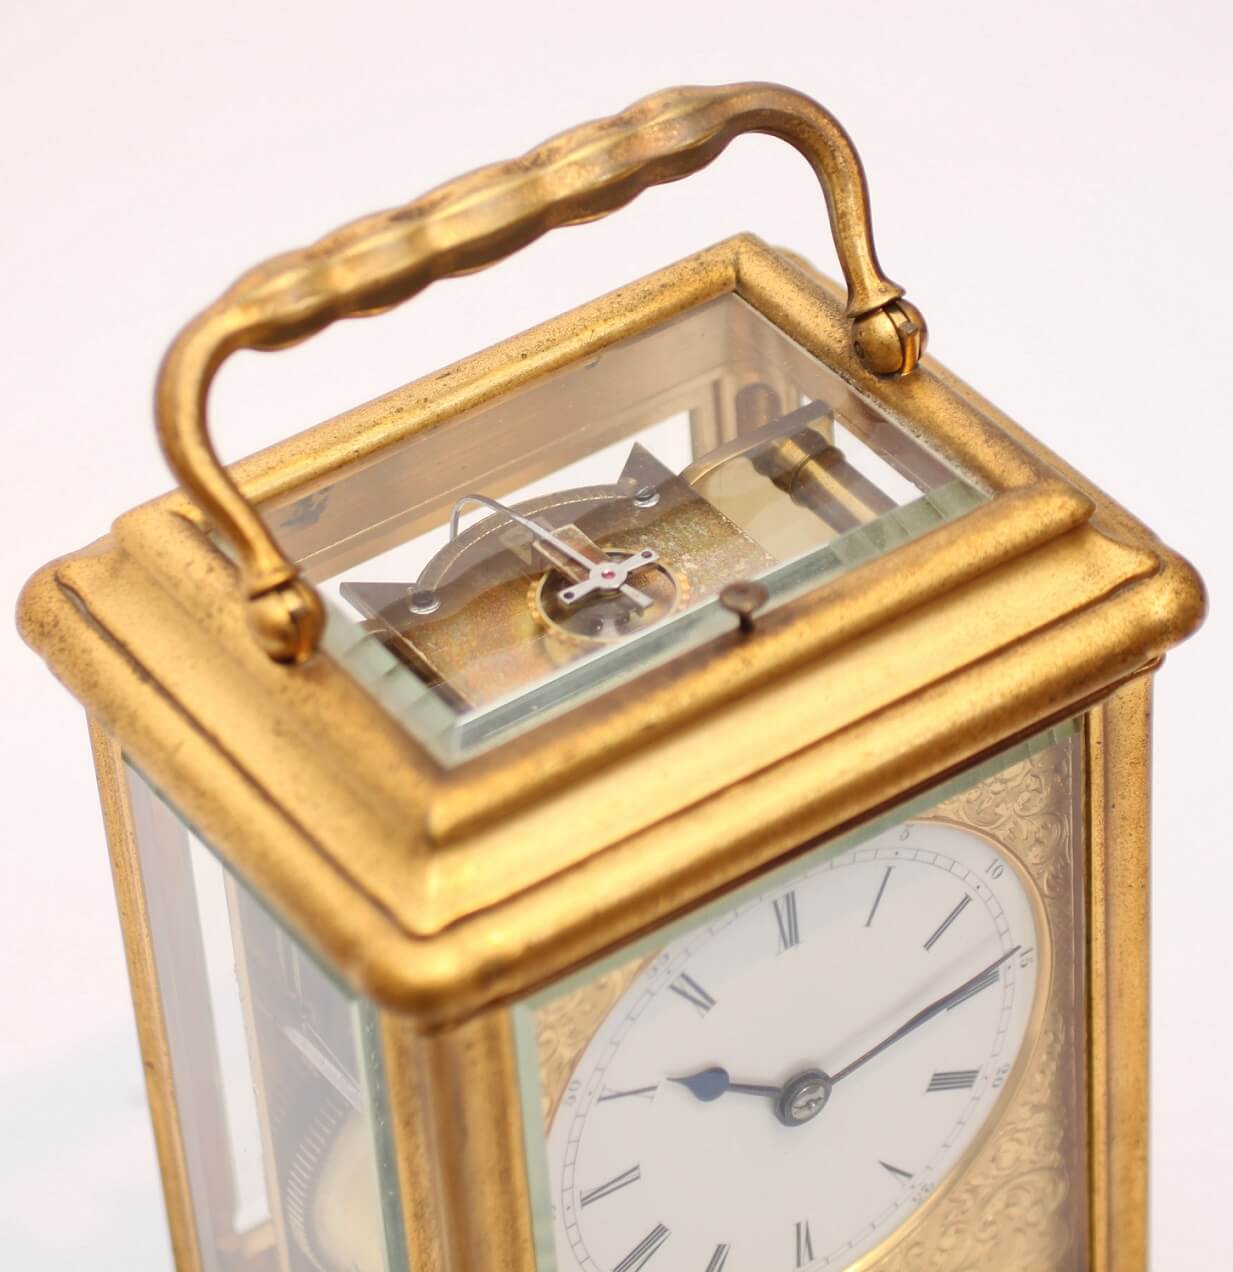 French gilt gorge giant carriage clock Drocourt 1870